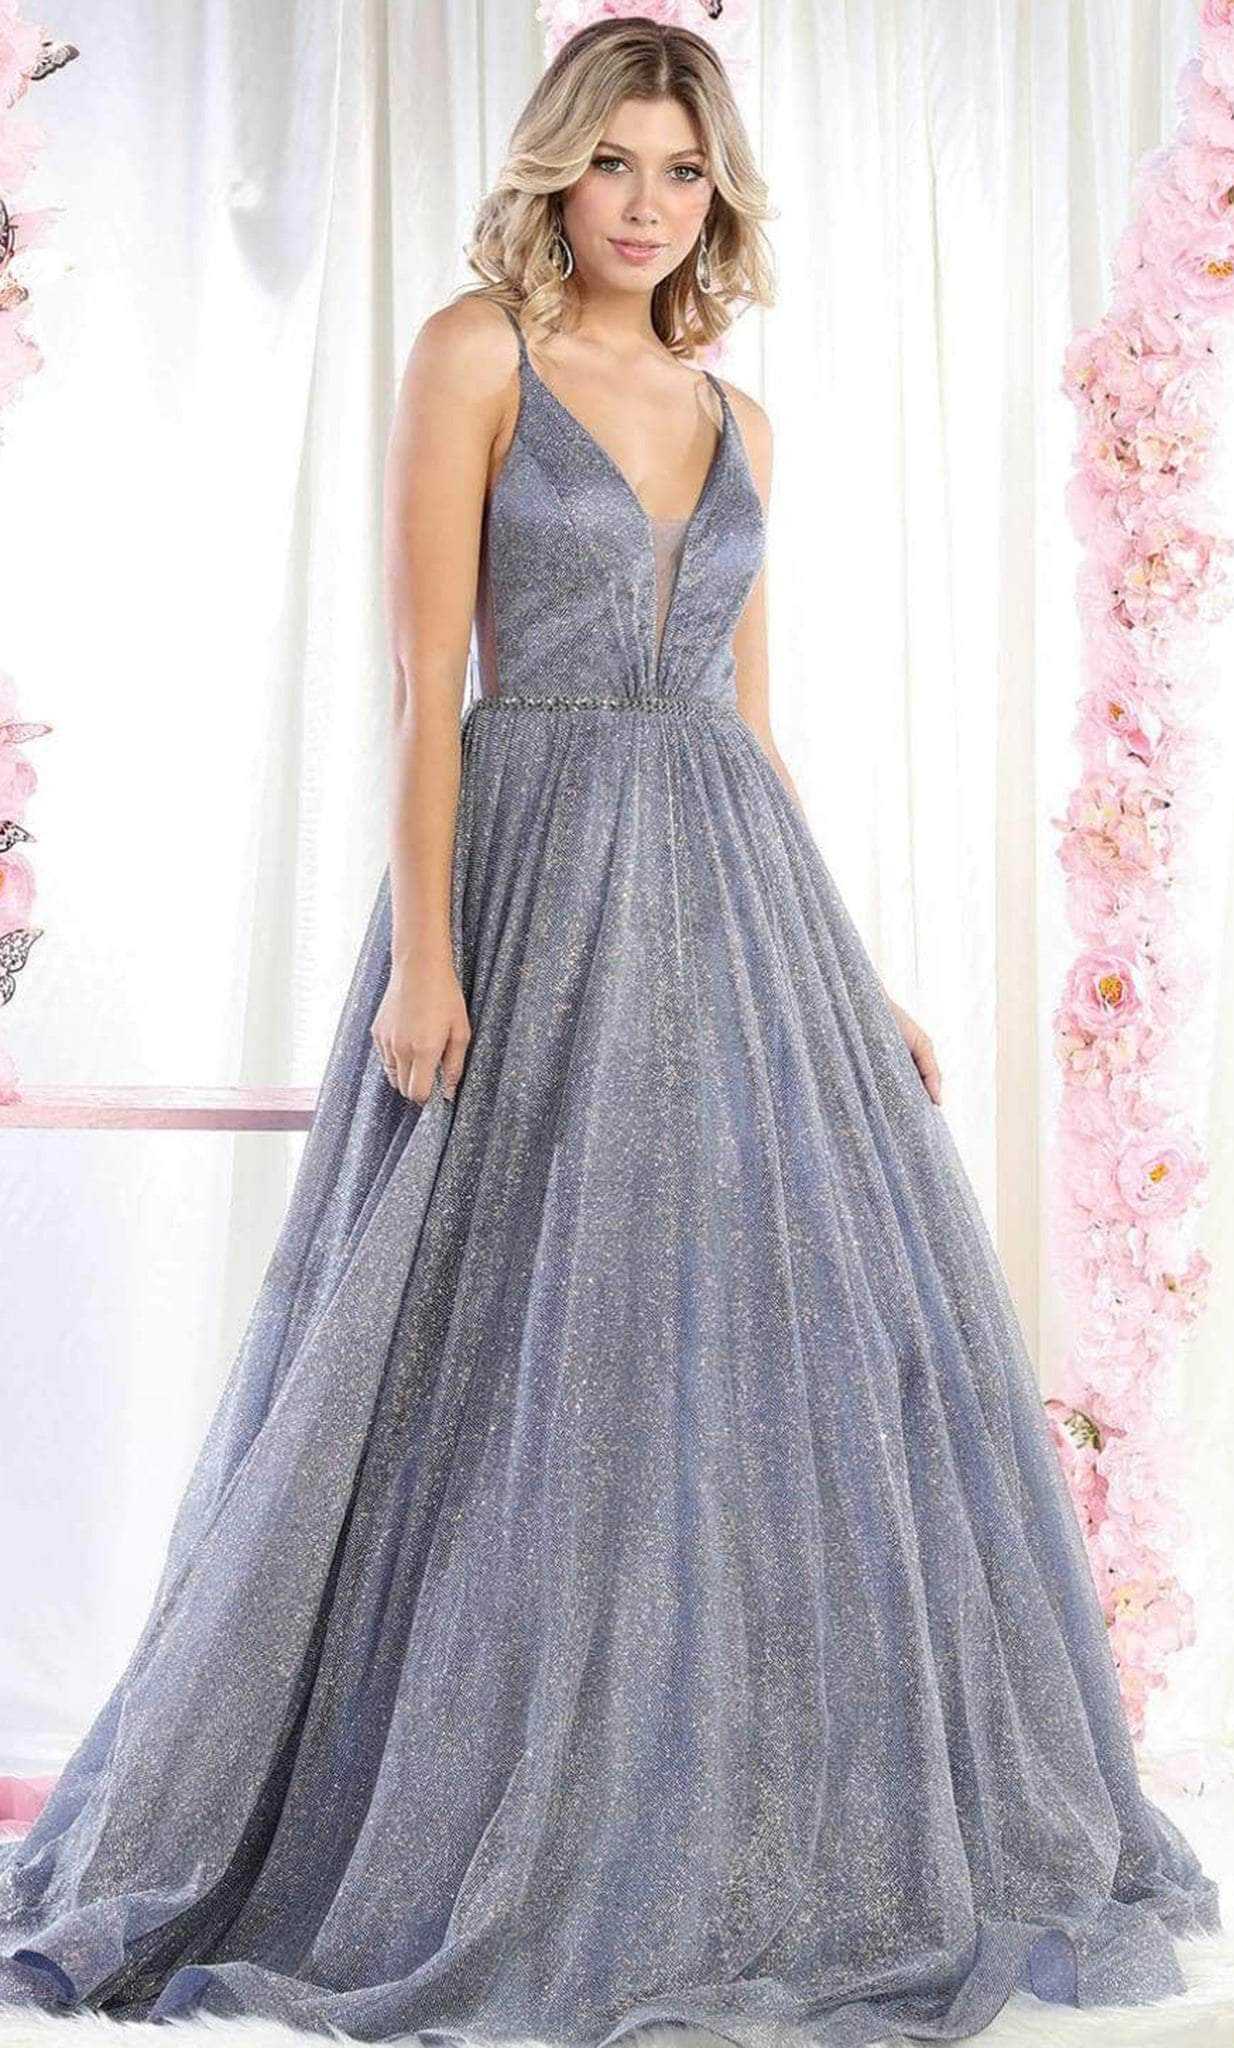 May Queen, May Queen RQ7983 - Sleeveless V Neck A Line Dress